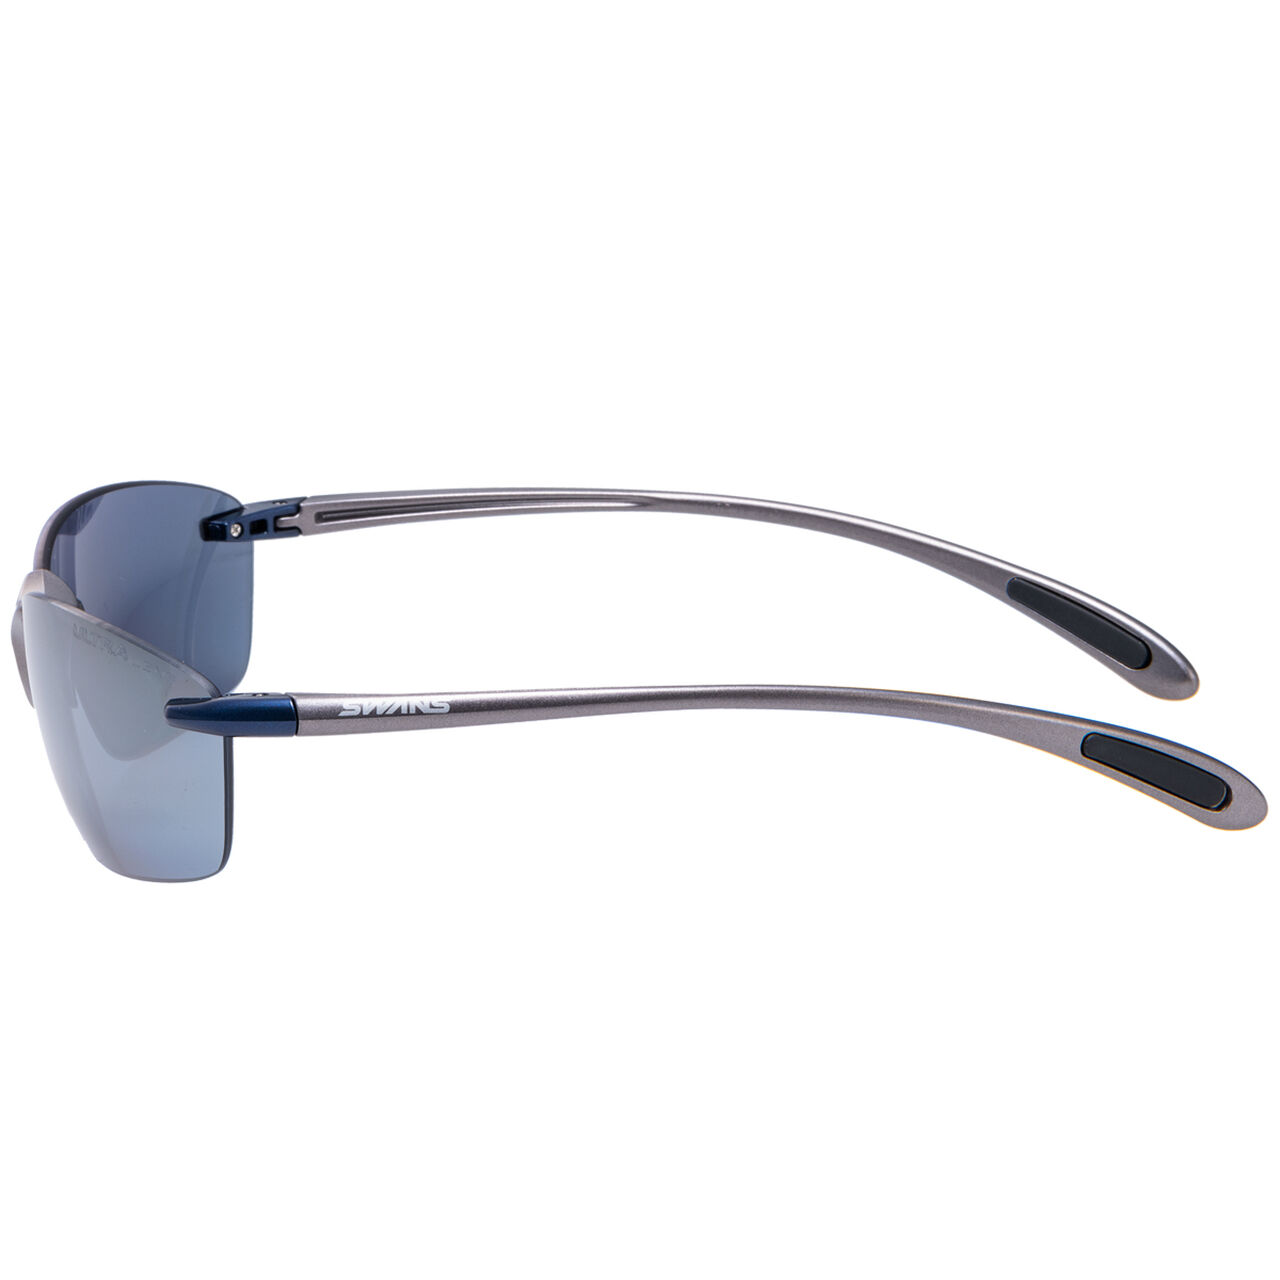 SA-Fit 0767 Silver mirror Polarized ULTRA Iceblue,Opt10, large image number 2